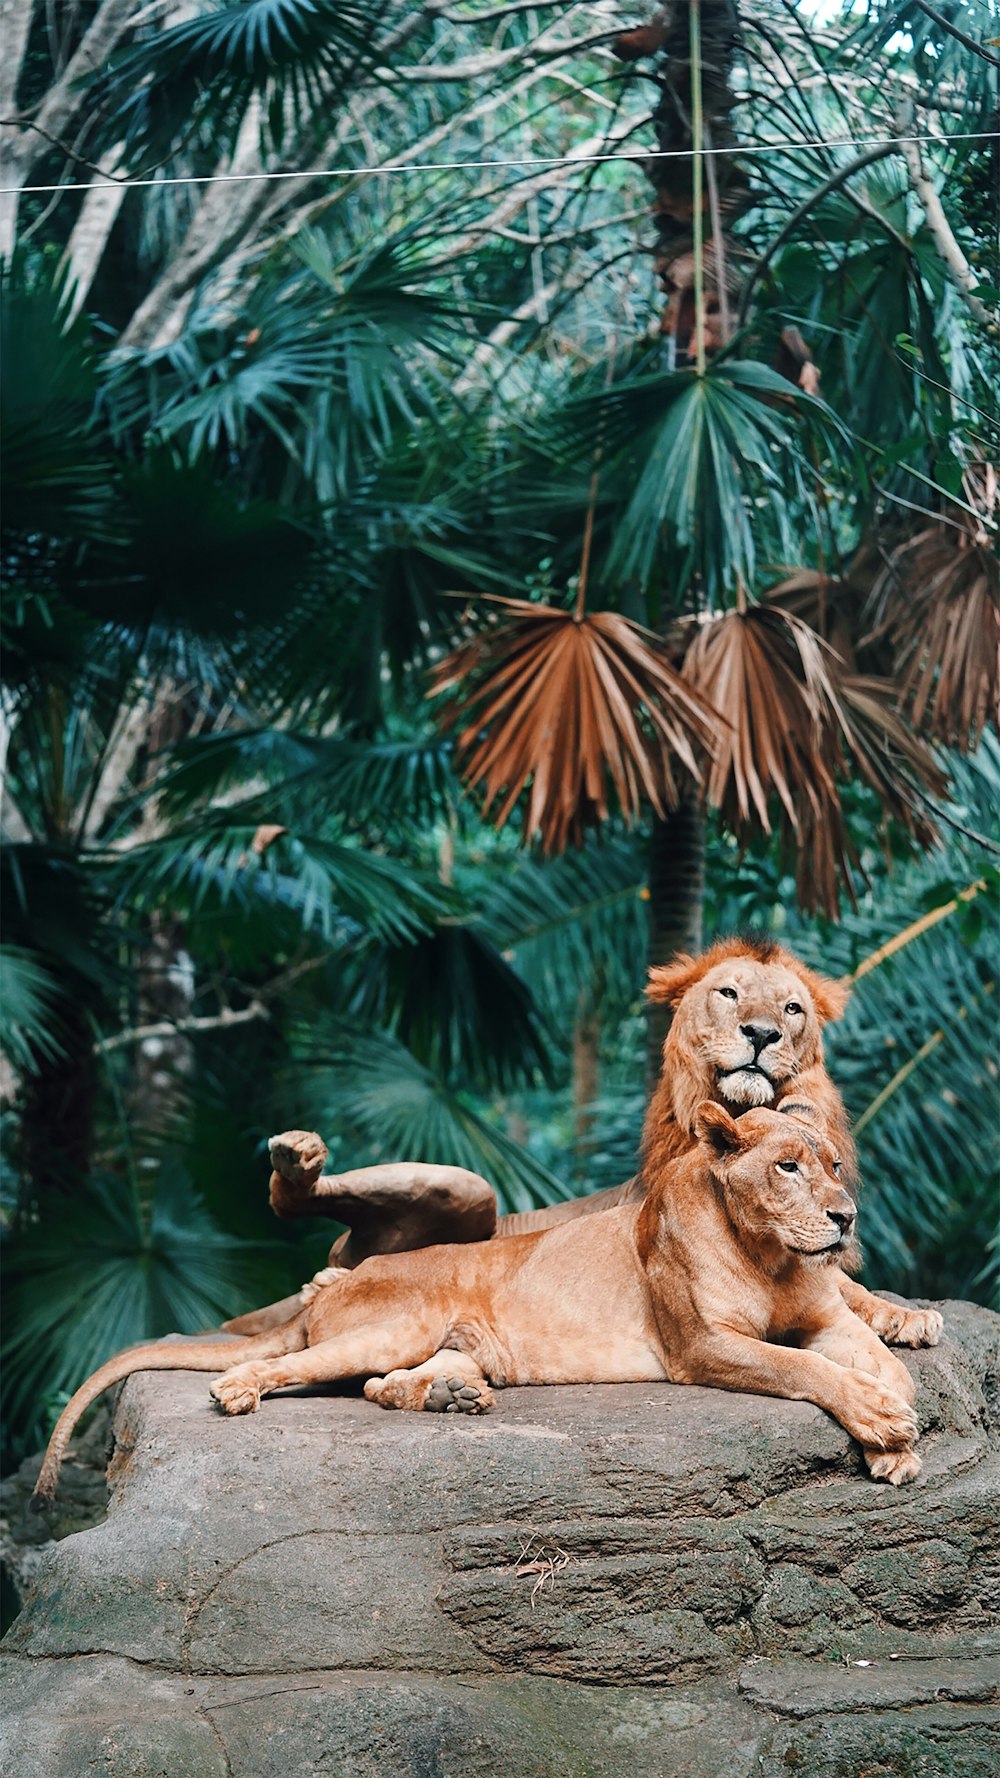 lion lying on rock near green palm tree during daytime